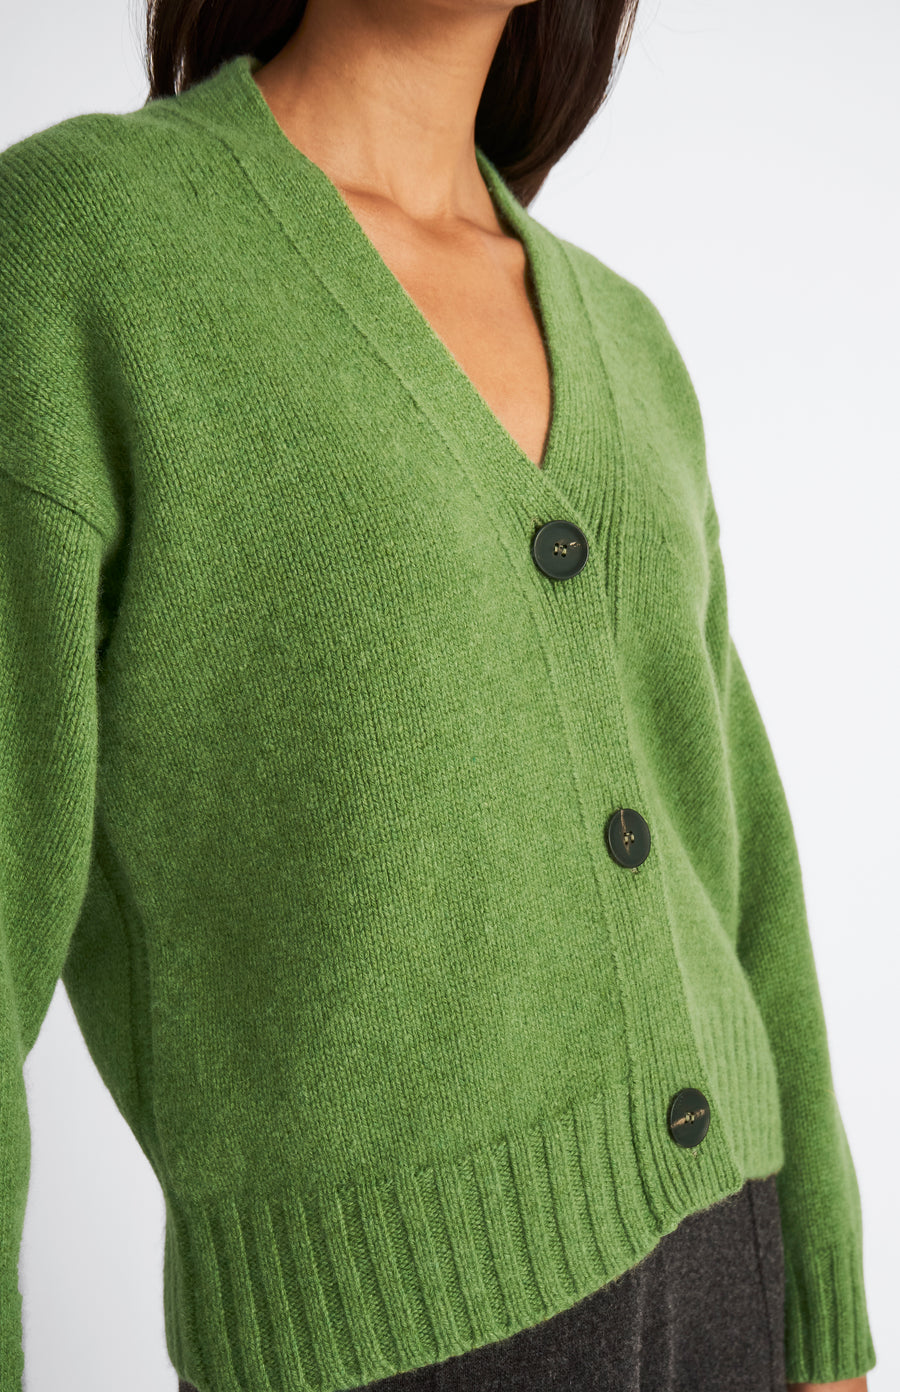 Pringle of Scotland Women's Cropped Cosy Cashmere Cardigan In Wood Sage showing button detail